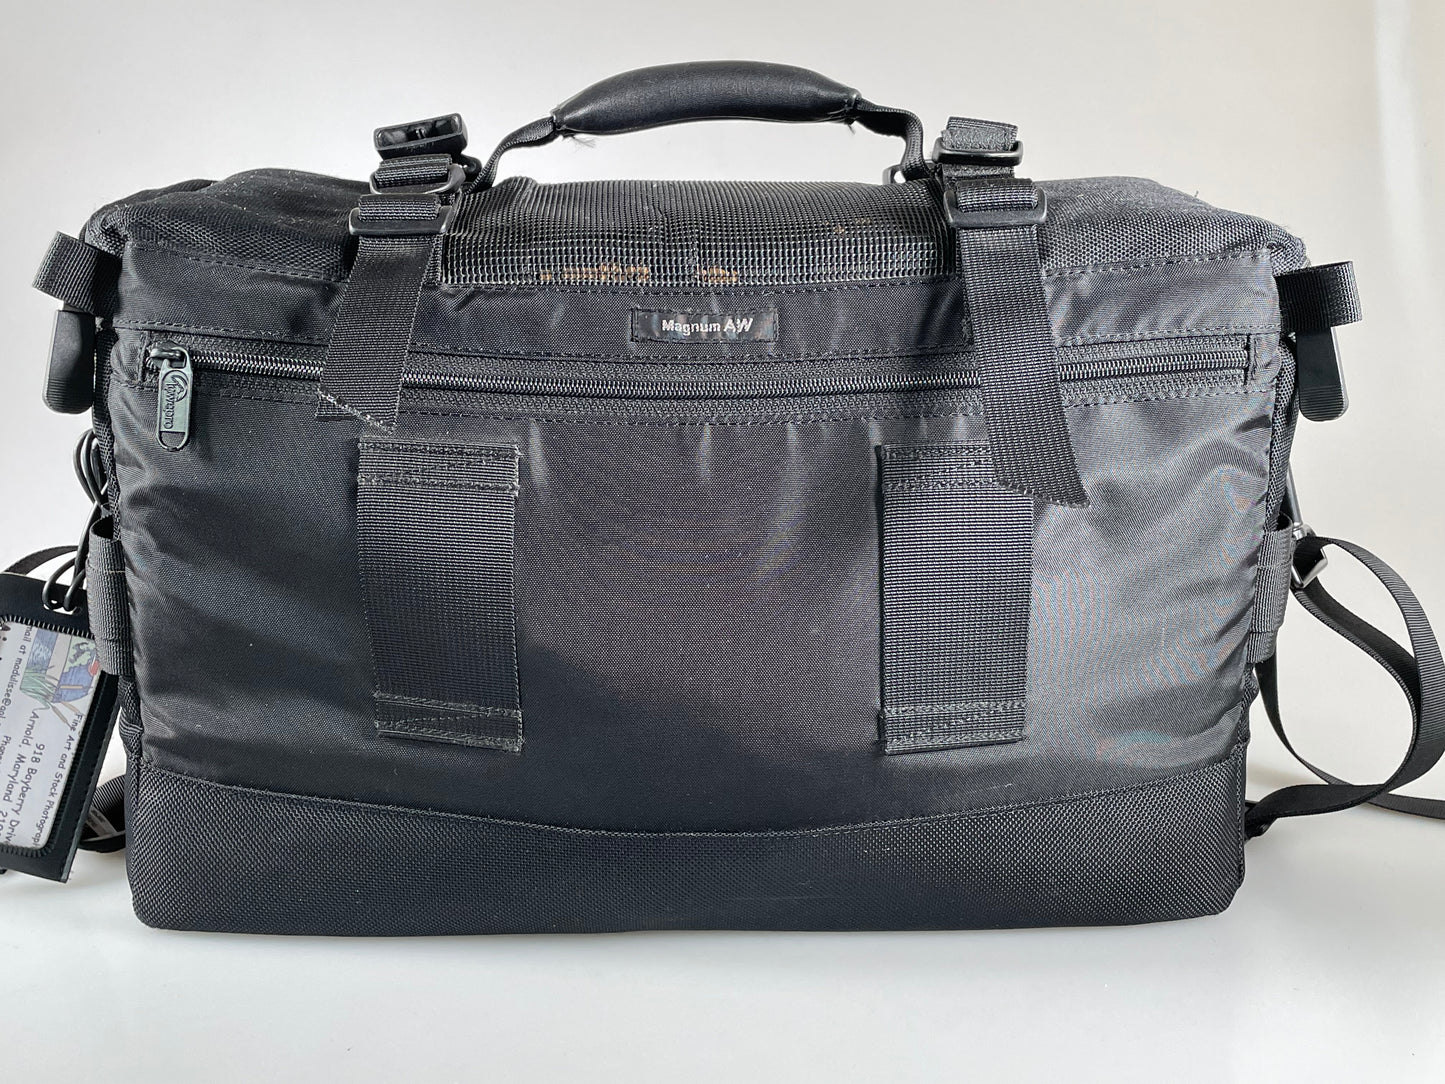 Lowepro Magnum AW Camera Bag Carry Case Adjustable Built In Rain Fly